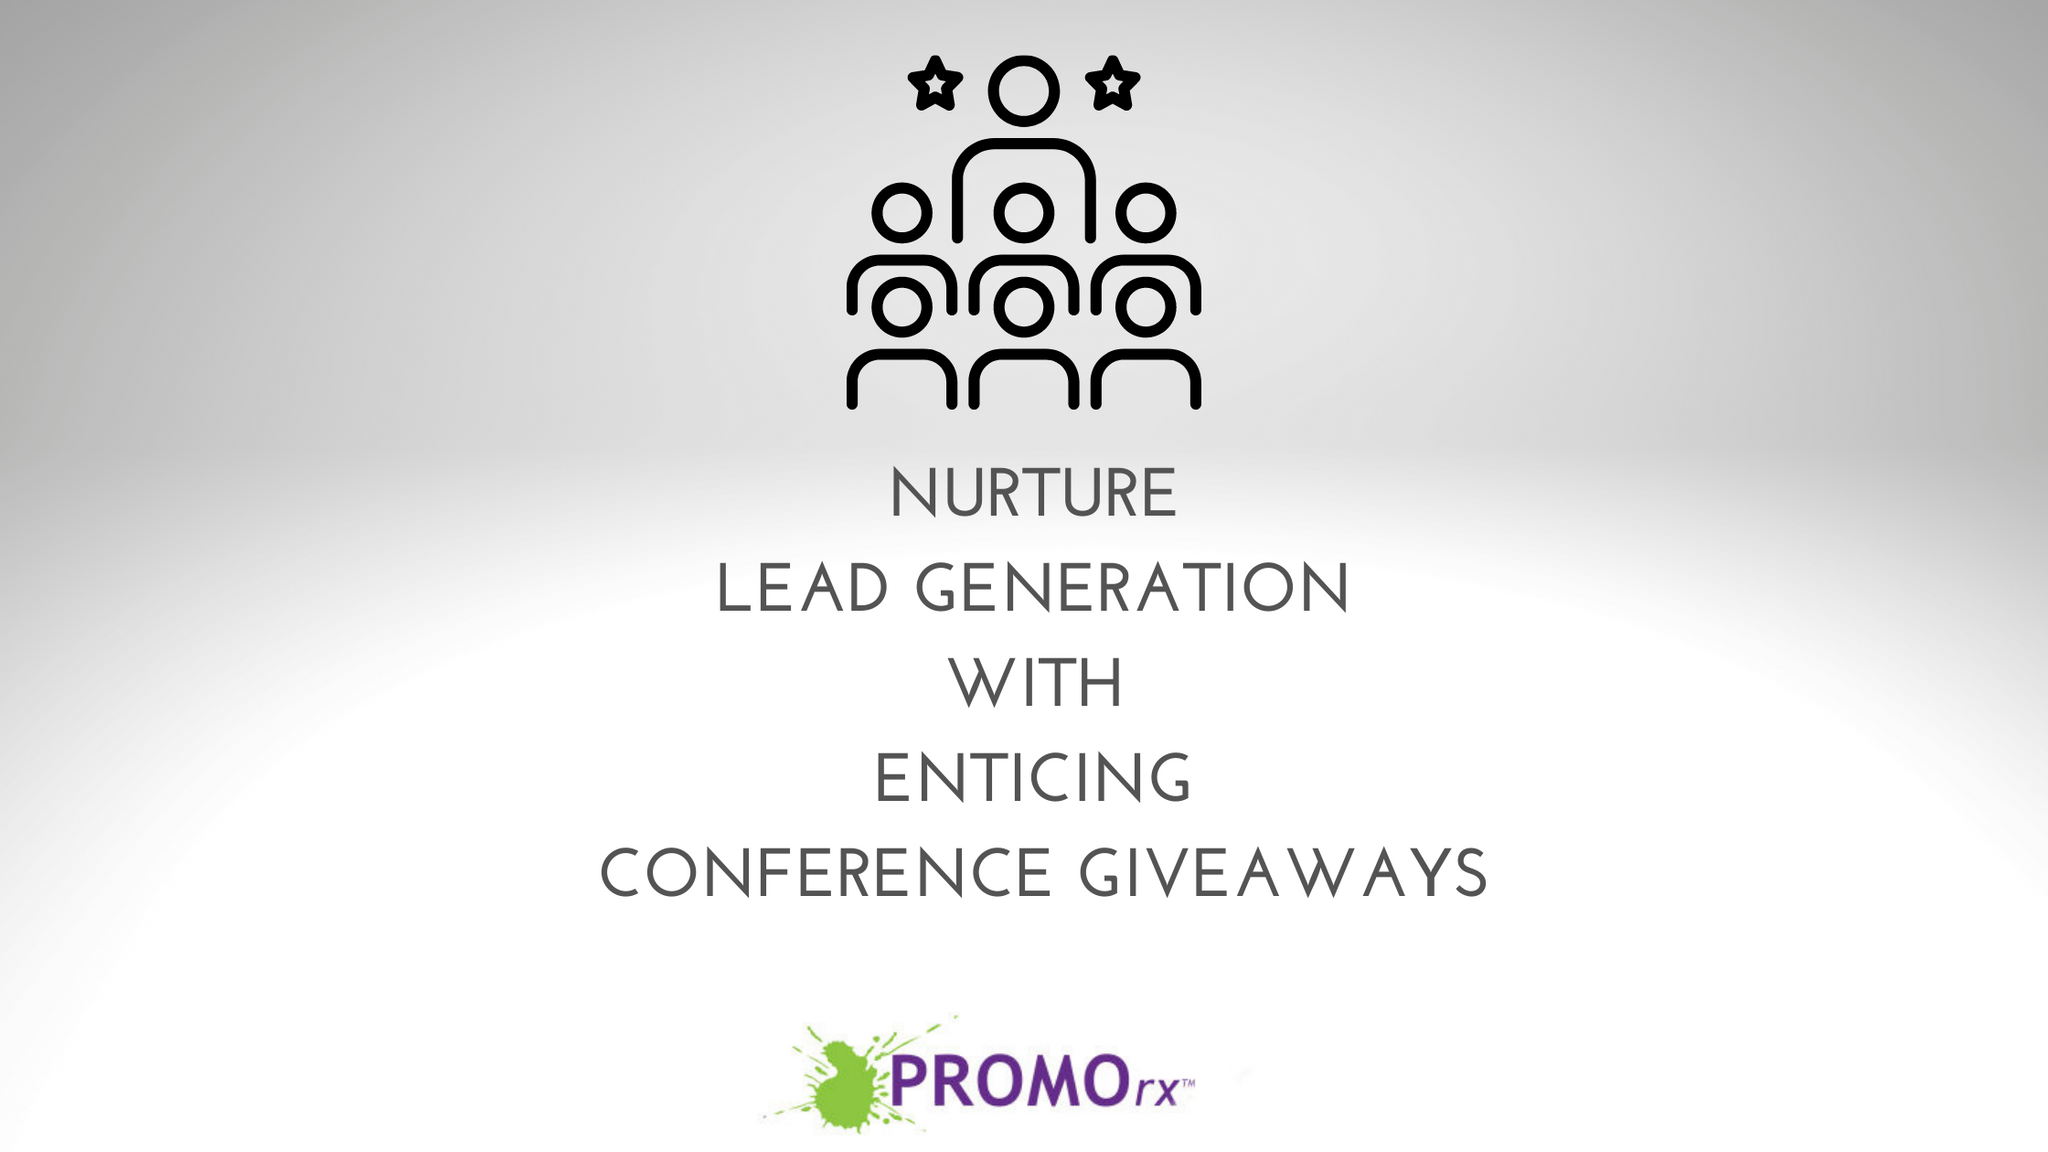 Nurture Lead Generation with Enticing Conference Giveaways